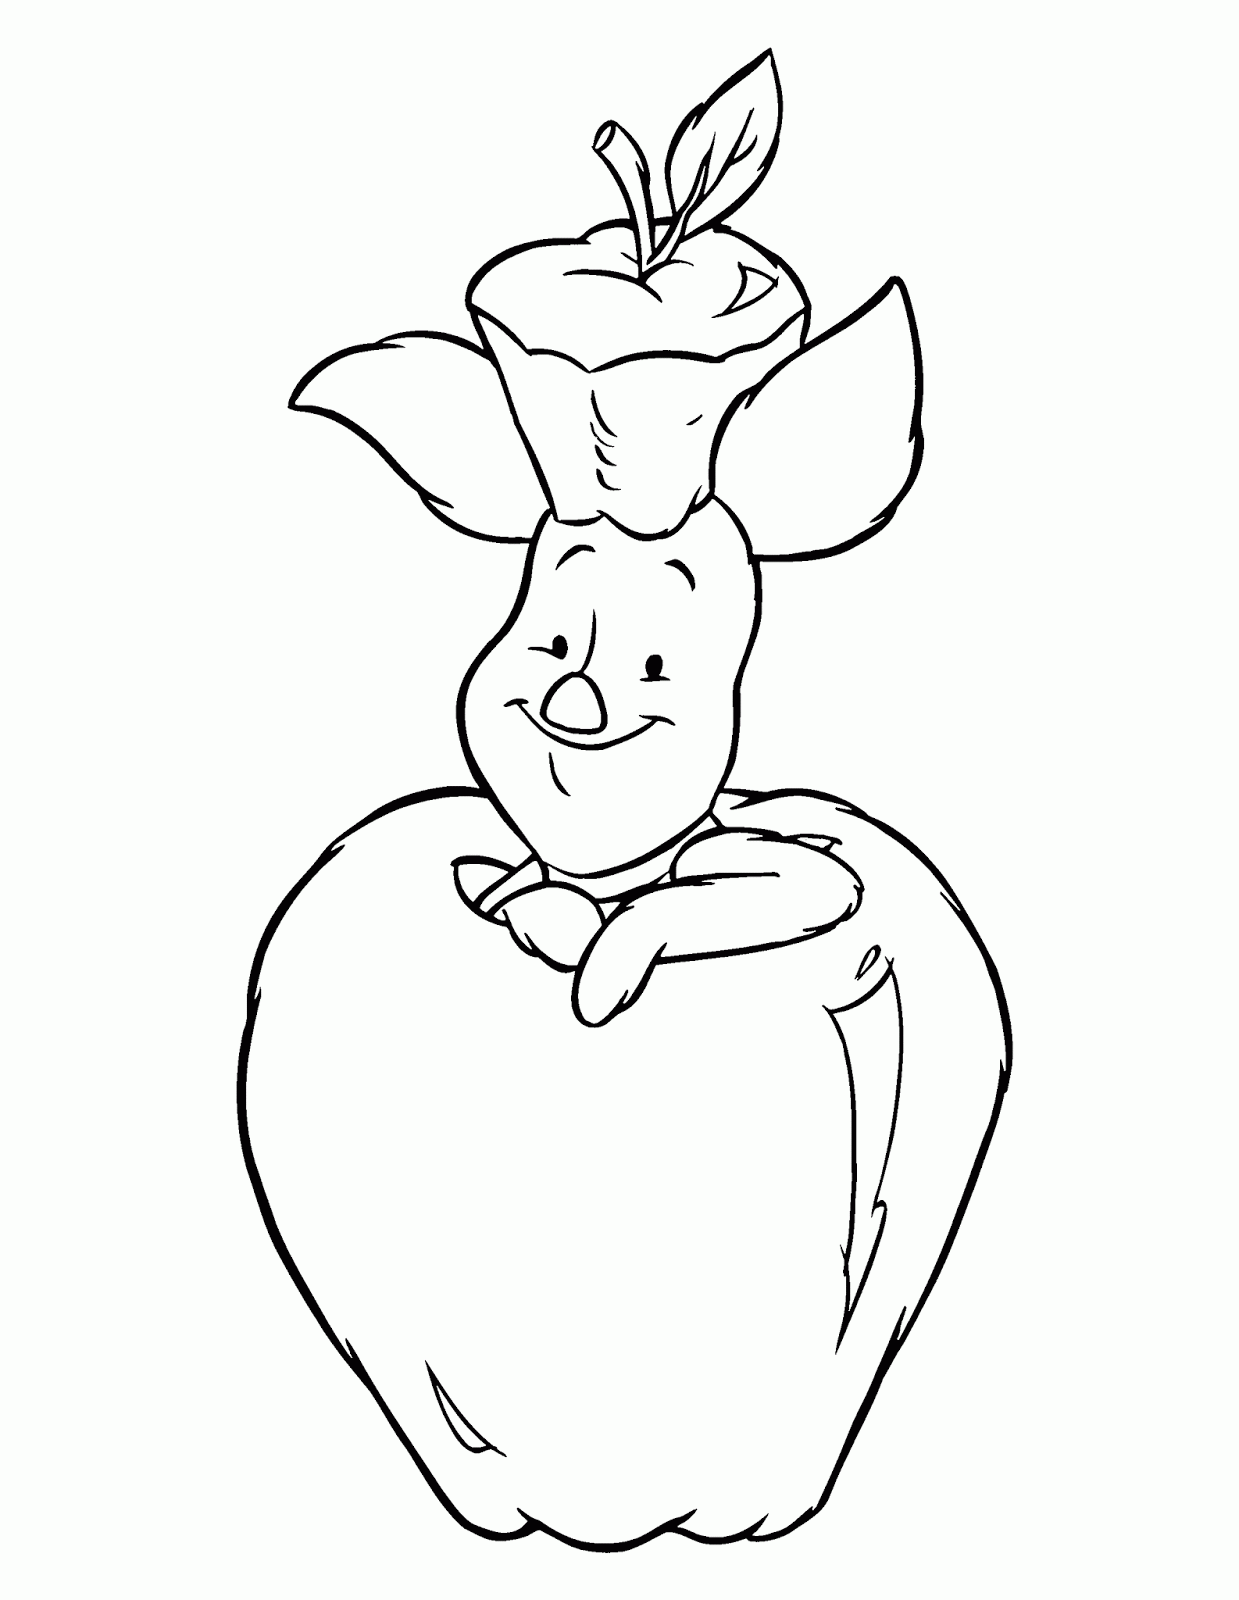 Piglet Apple Winnie the Pooh Coloring Pages